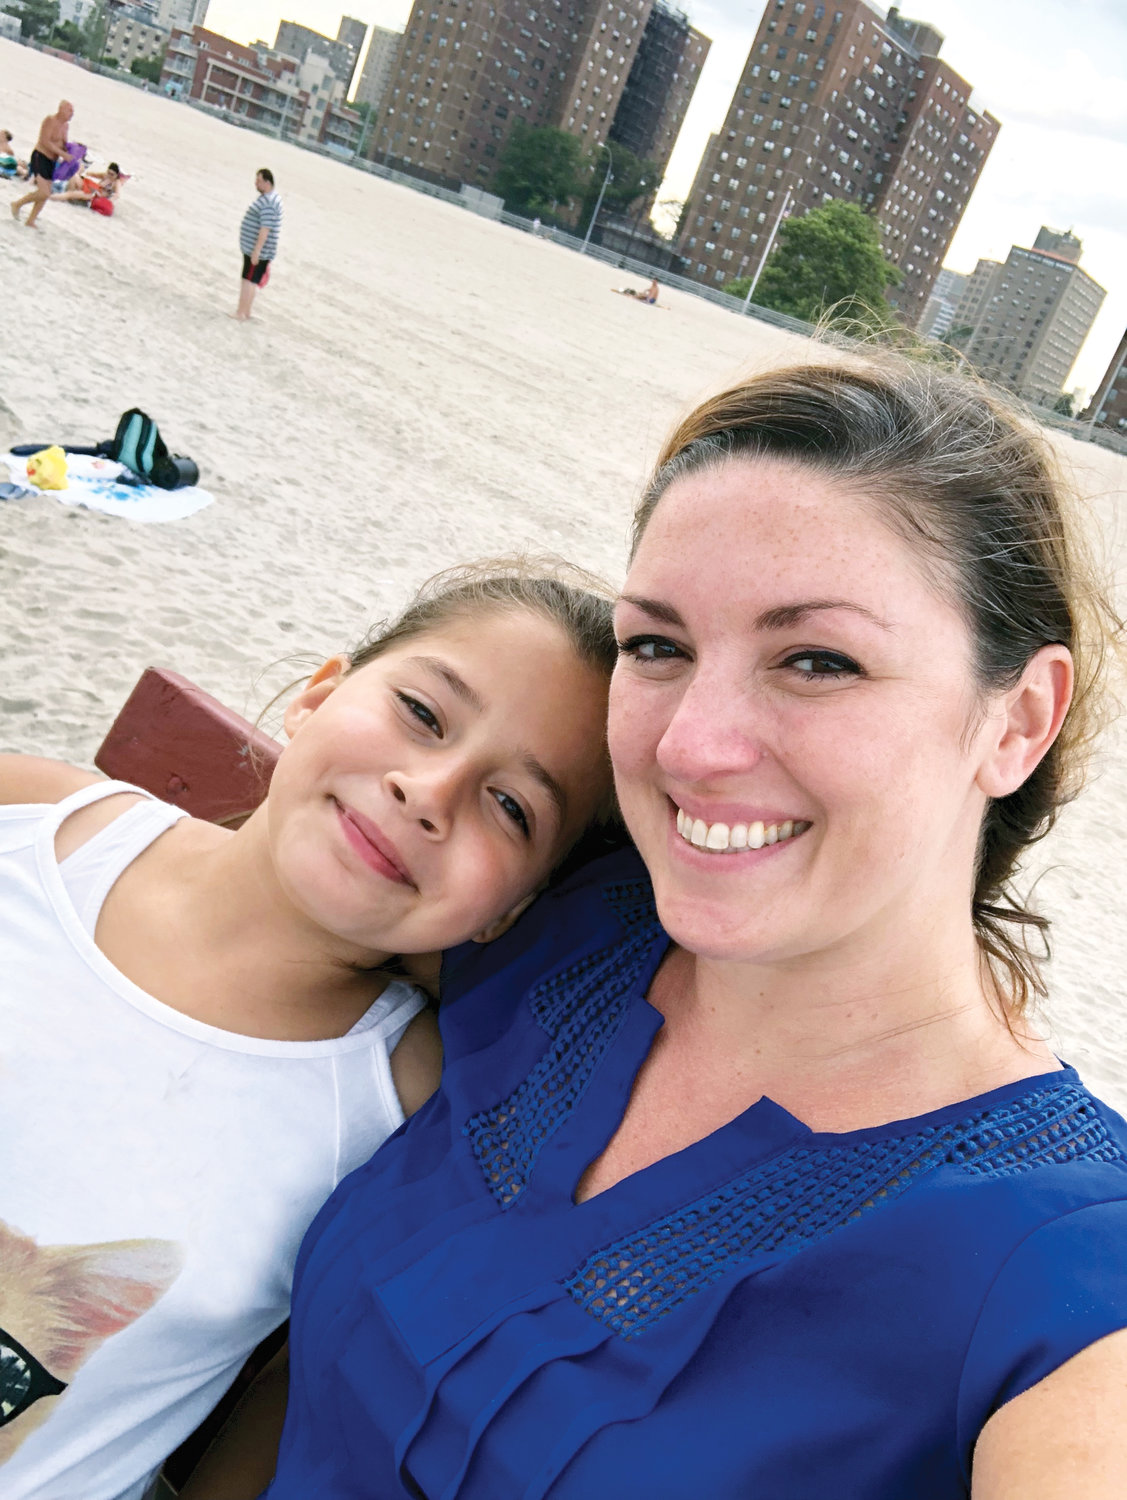 A BIG DIFFERENCE—Esmeralda, 11, above, and her mentor, Sara, relax on the beach at Coney Island last year.